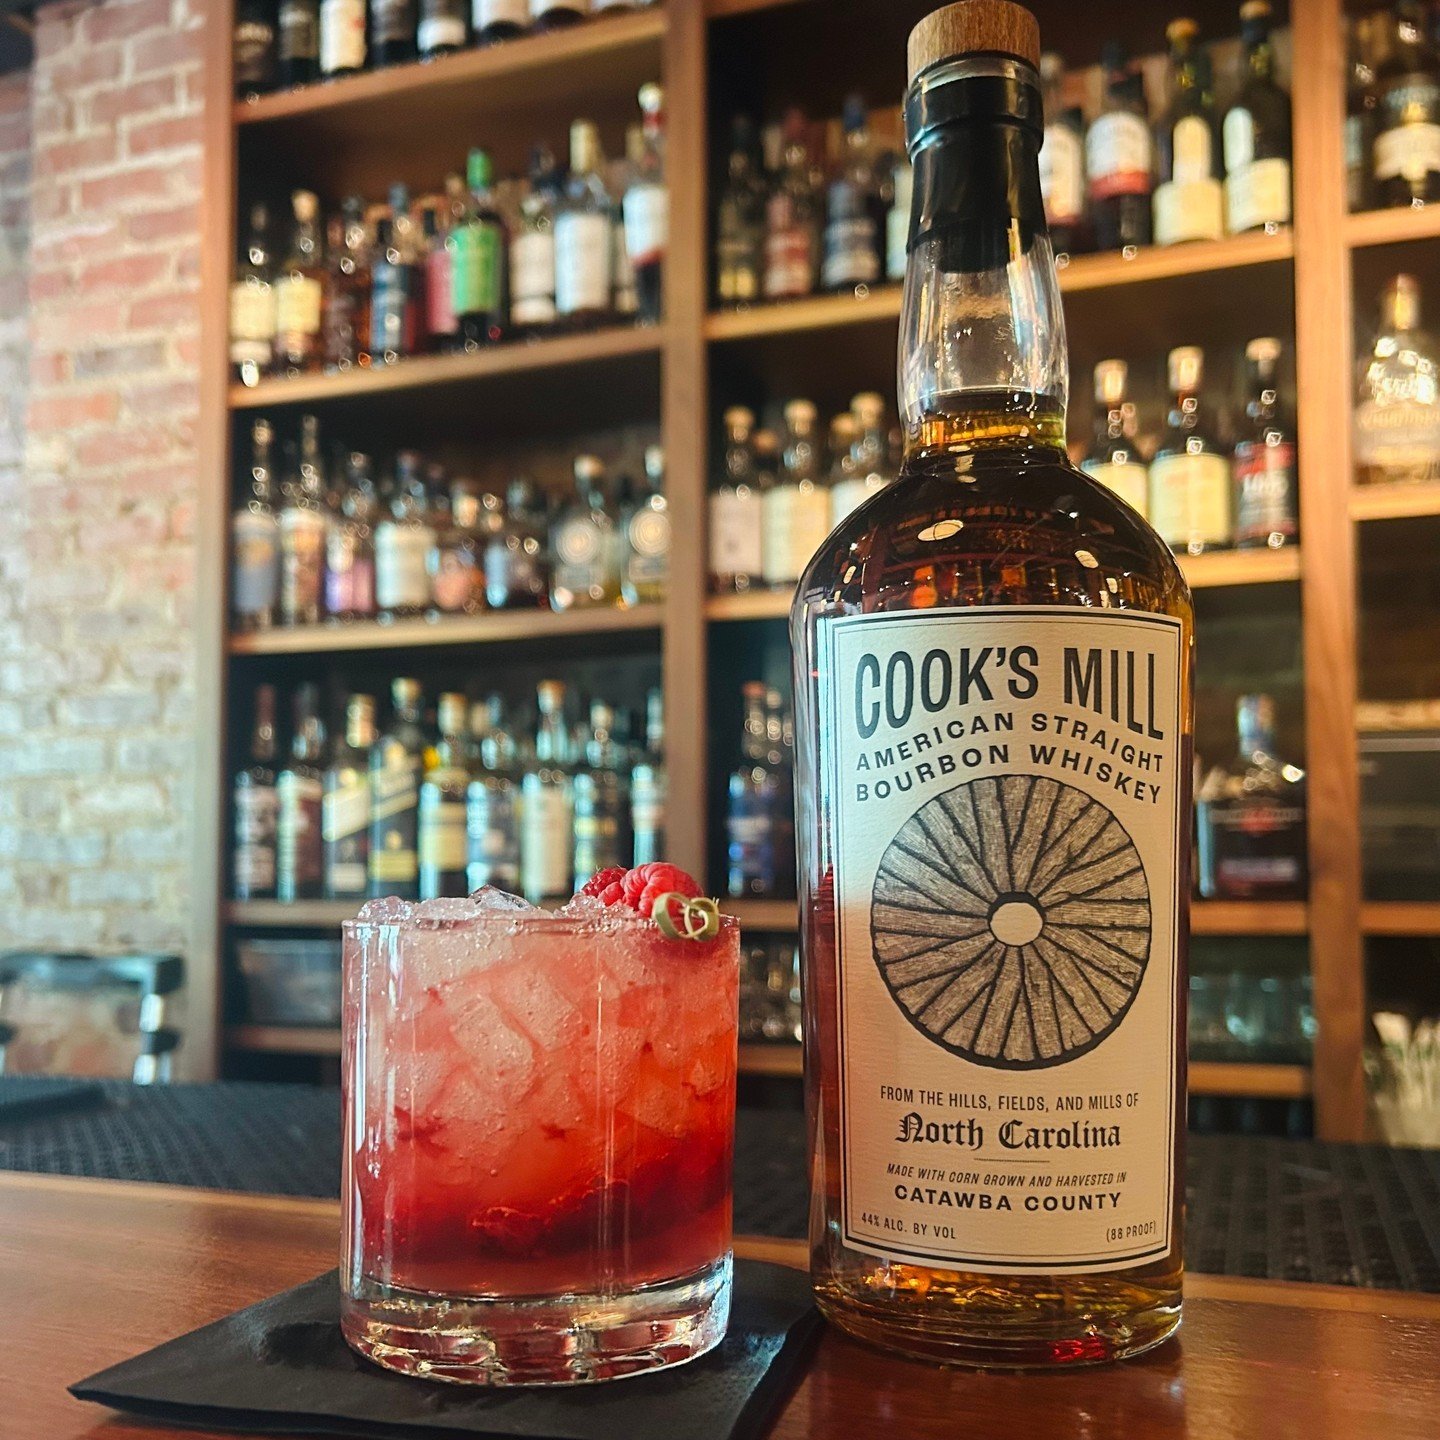 Ramble on over &amp; order this week&rsquo;s #ThirstyThursday $10 cocktail, a bourbon bramble featuring @cooksmillwhiskey bourbon! 🥃 Fruity, tart, &amp; full of all that whiskey goodness, you&rsquo;ll be kicking yourself if you miss out on this one!